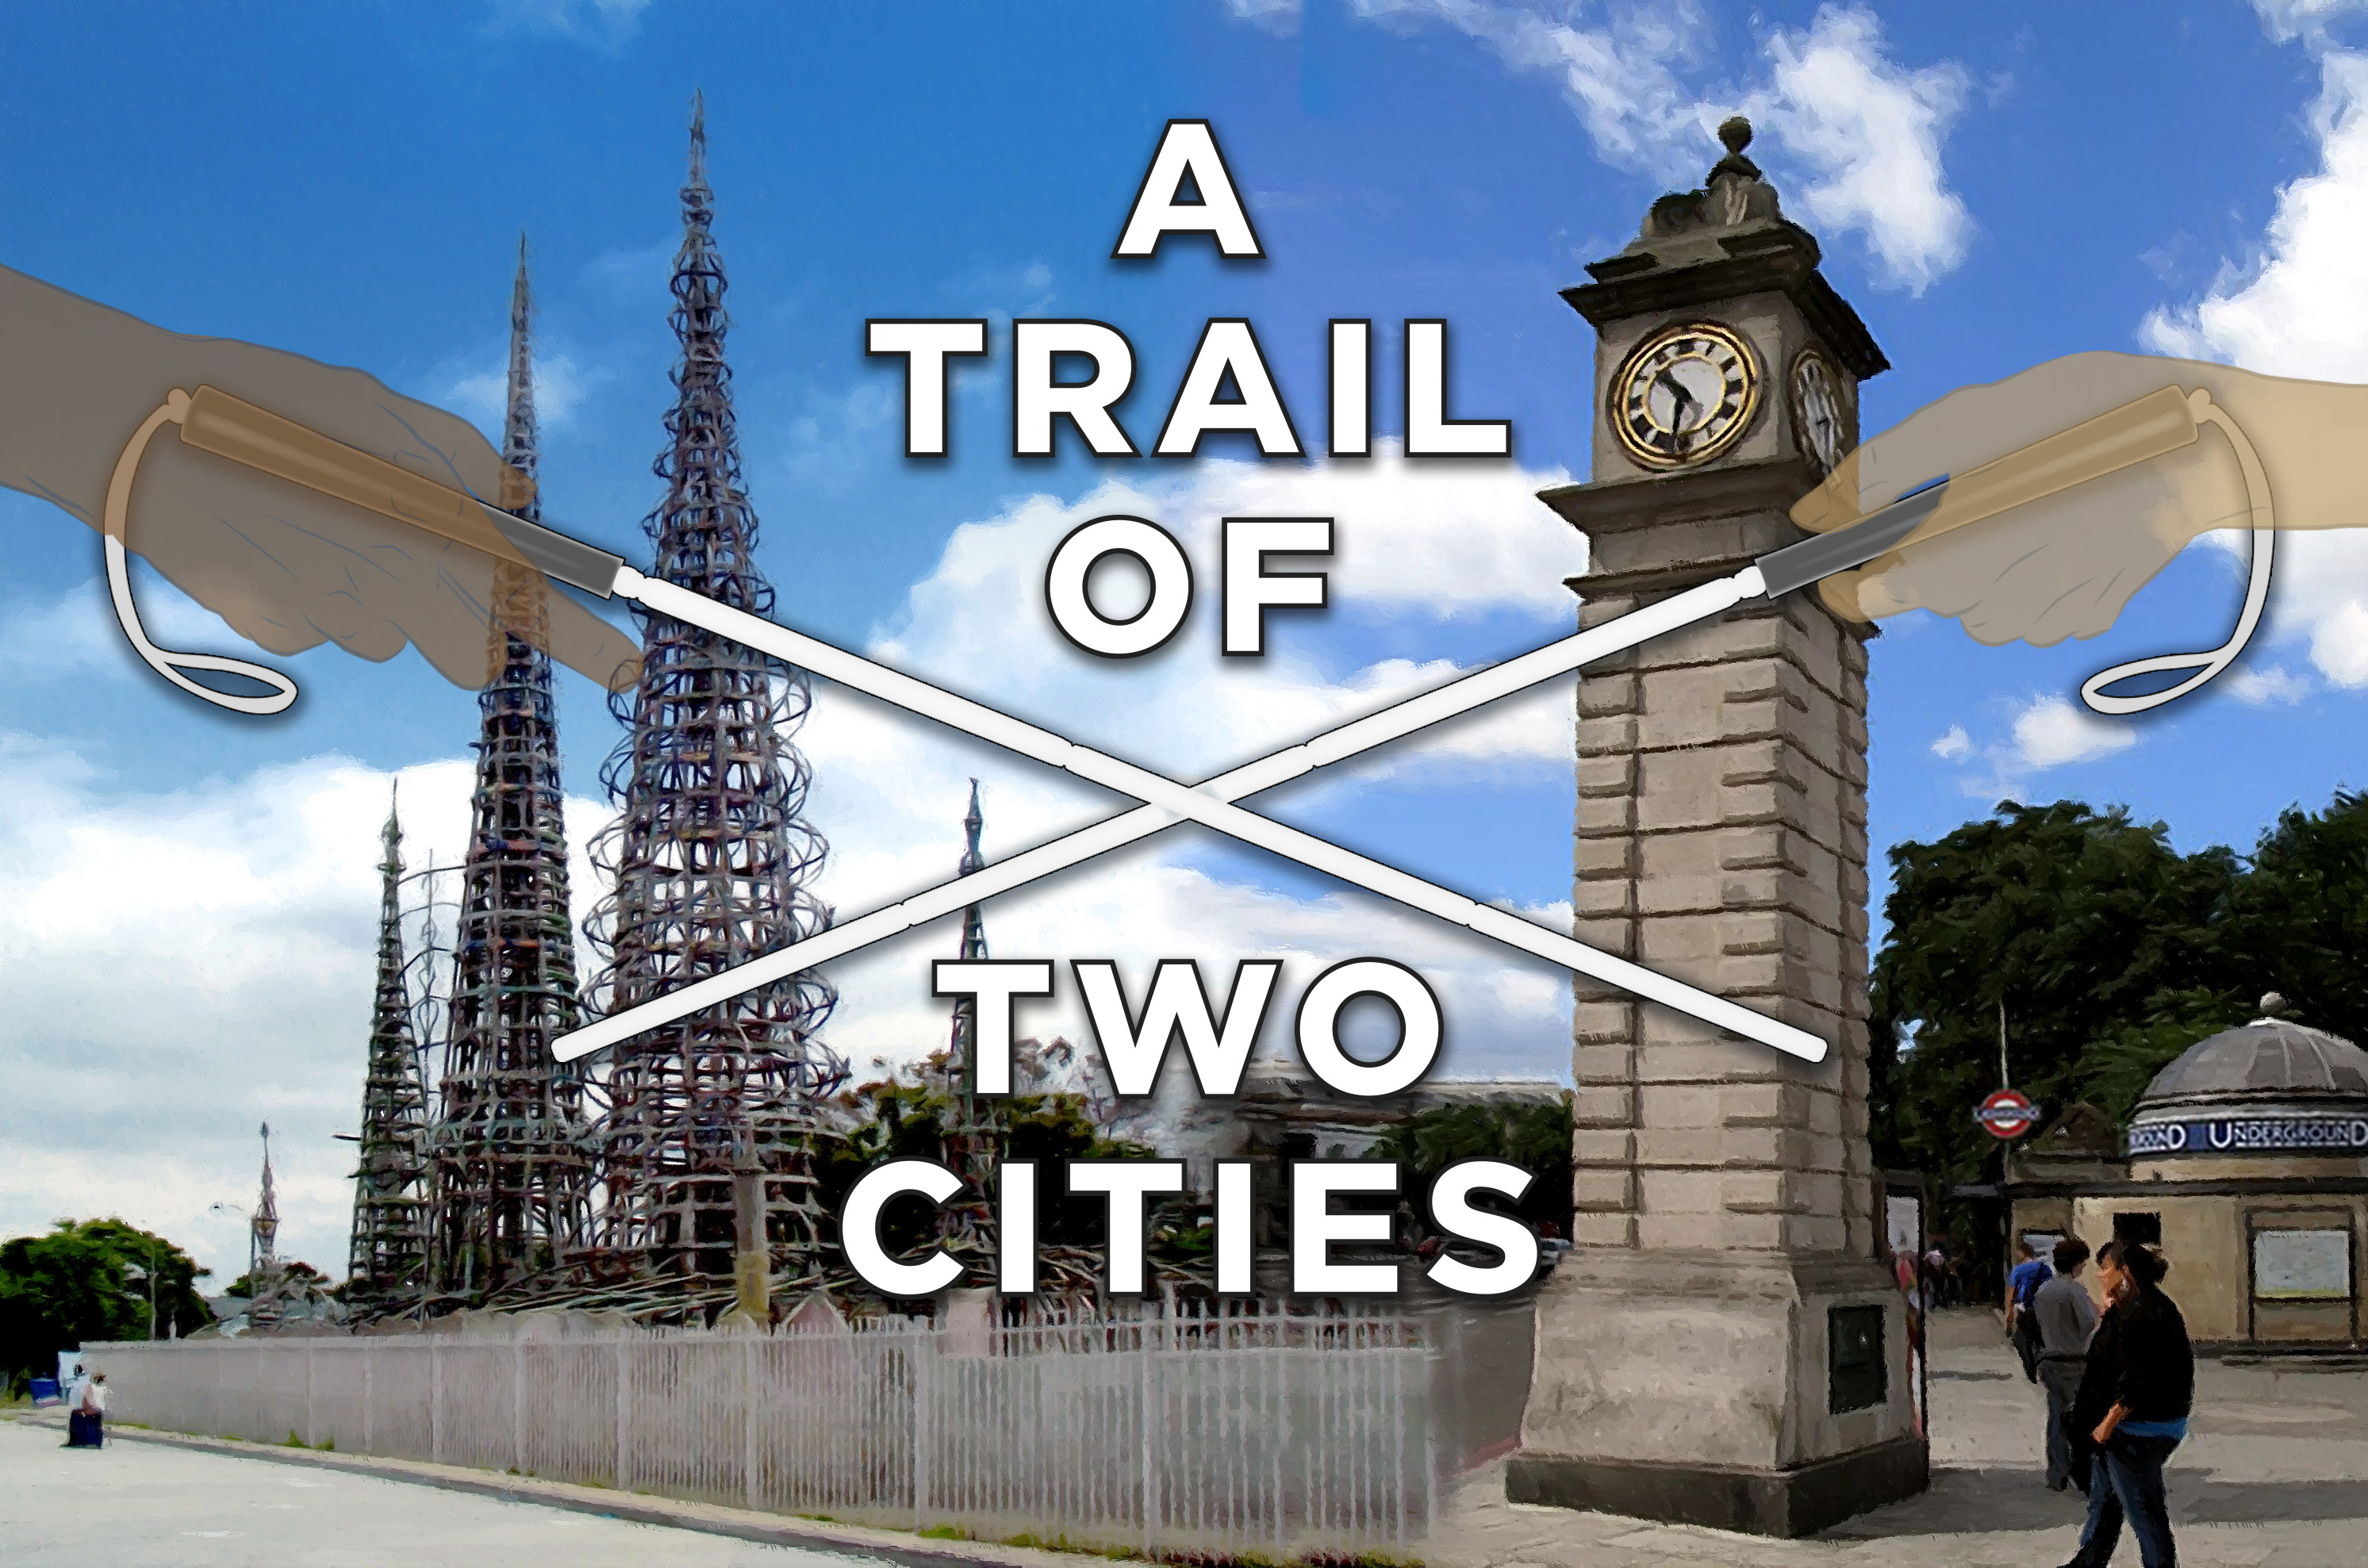 A graphic image of two crossed white canes bisecting an image of the Watts towers in Los Angeles on the left, and Clapham Common tube station’s Clock tower on the right, with the title ‘A Trail of Two Cities’ in the middle of the canes.